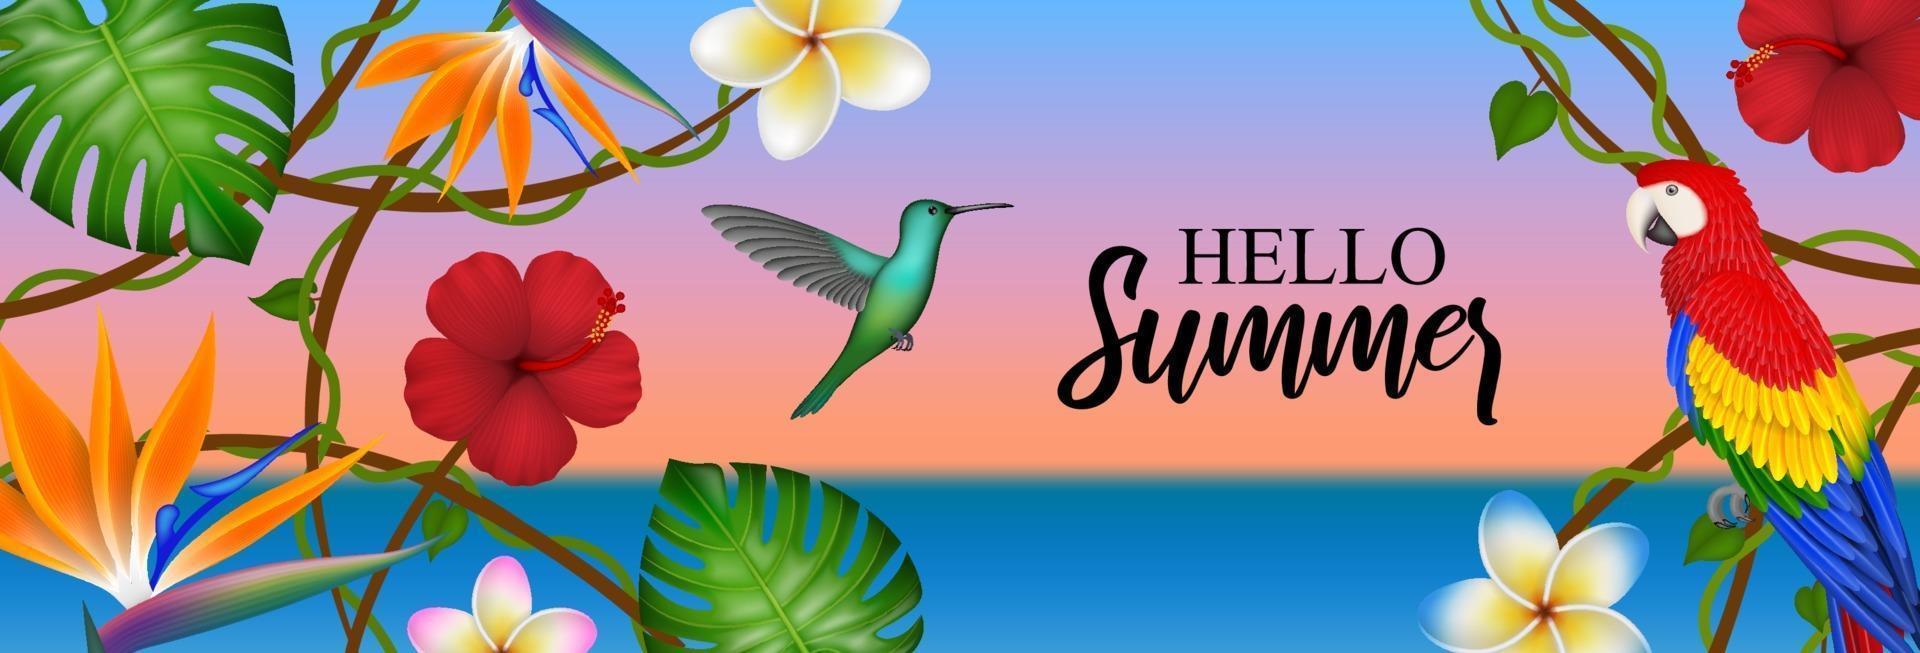 hello summer banner with tropical flowers, birds and leaves vector